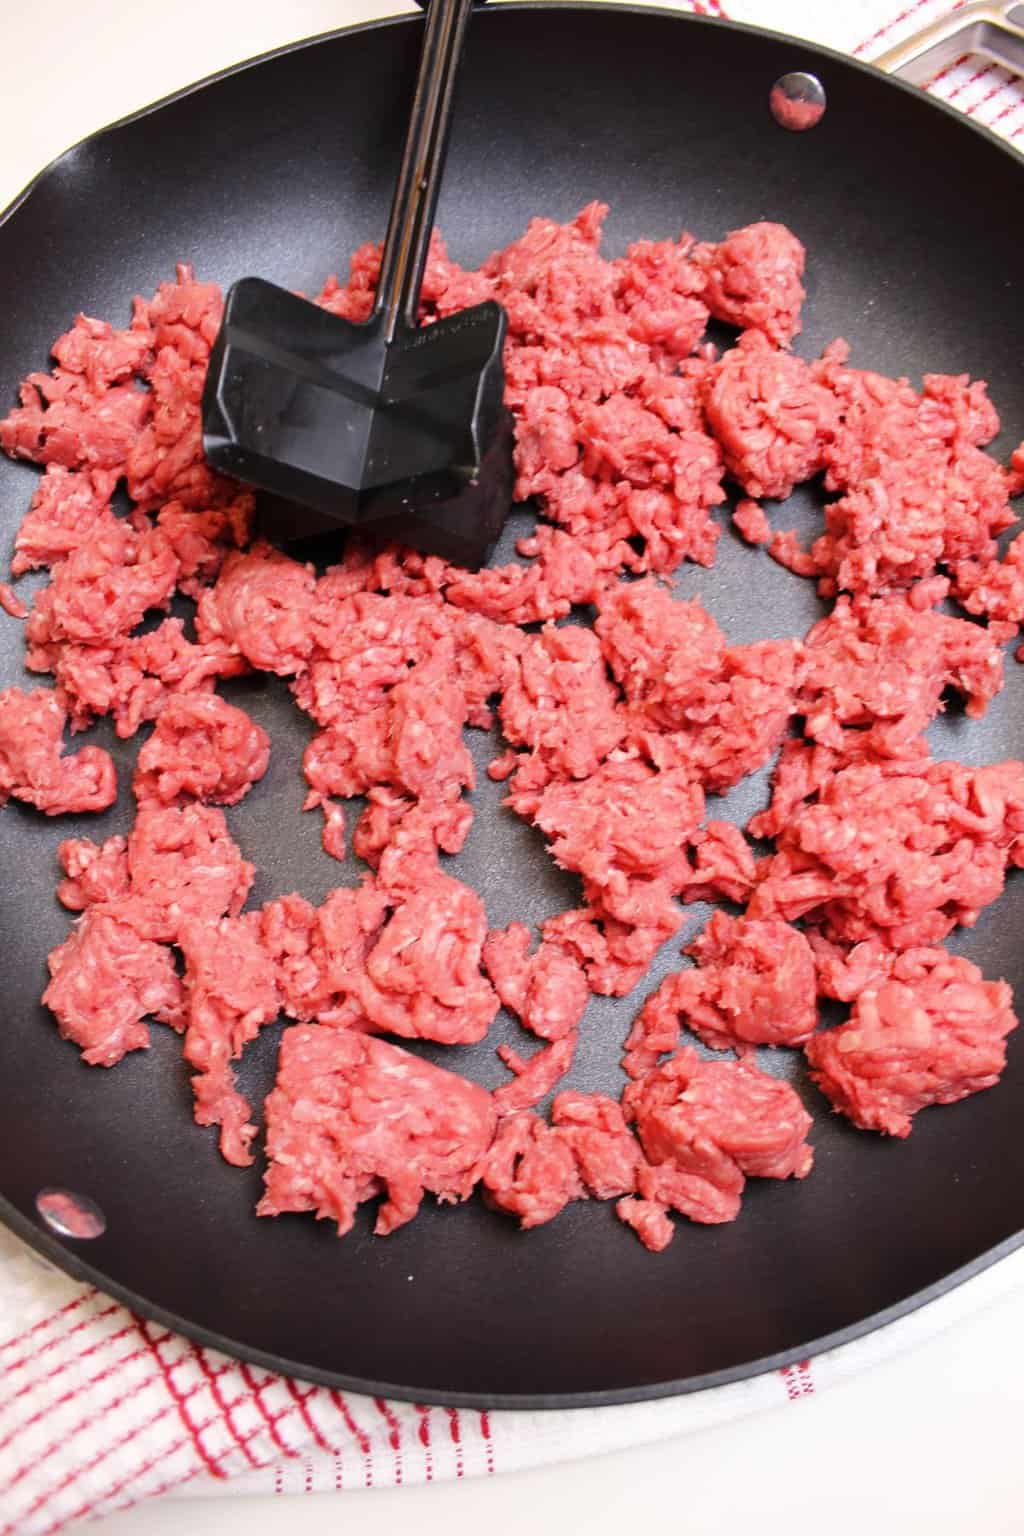 Ground beef cooking on a skillet.